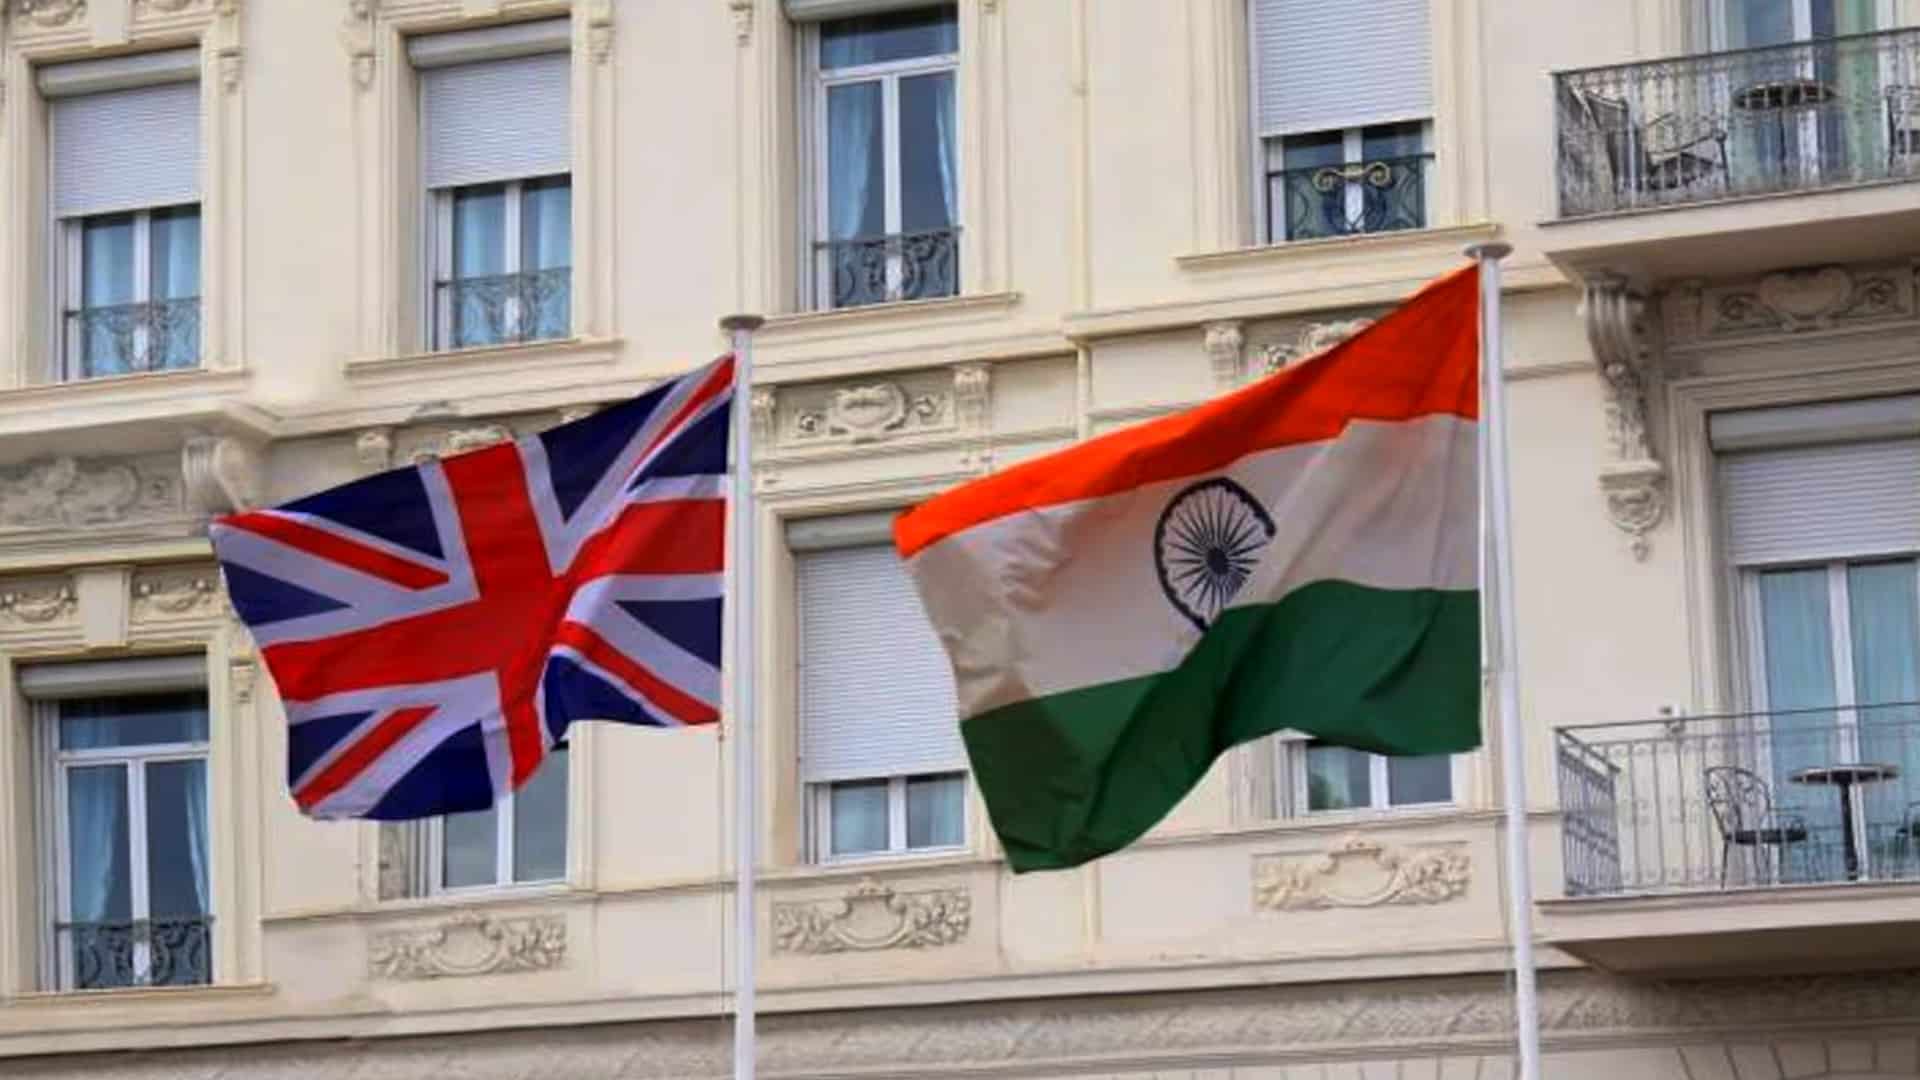 India-UK FTA has to be win-win for both sides, says FICCI president